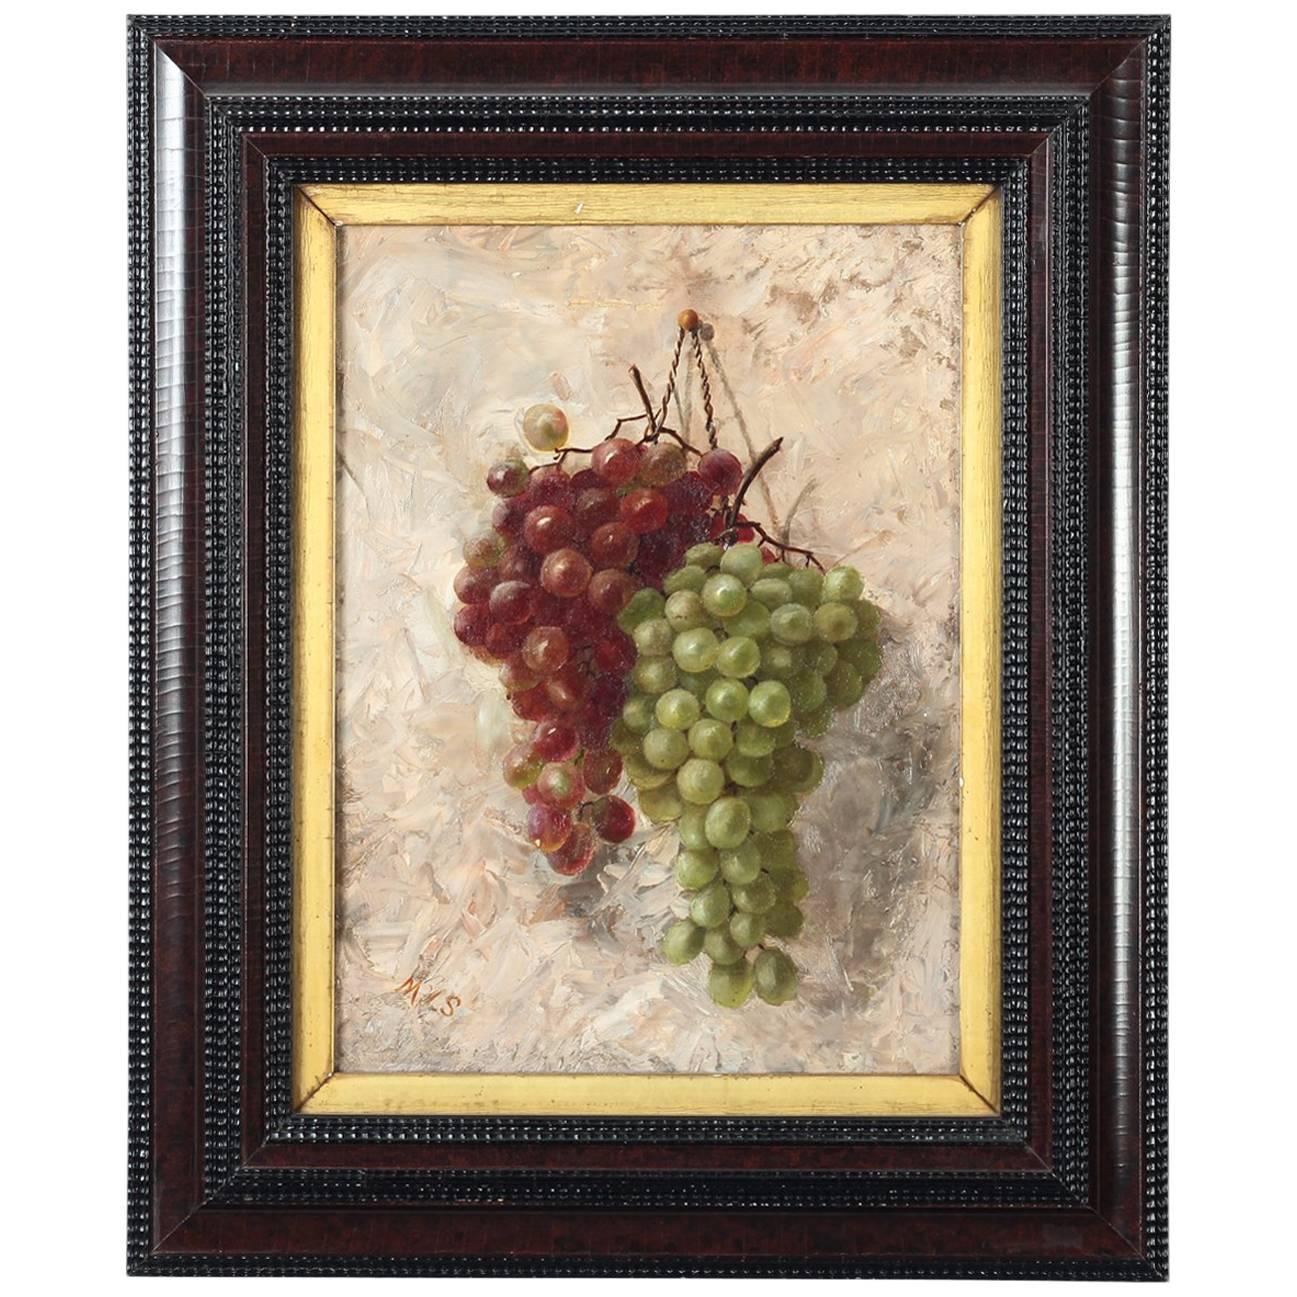 Antique American 'Grapes Still Life' Oil on Canvas Painting, 19th Century For Sale